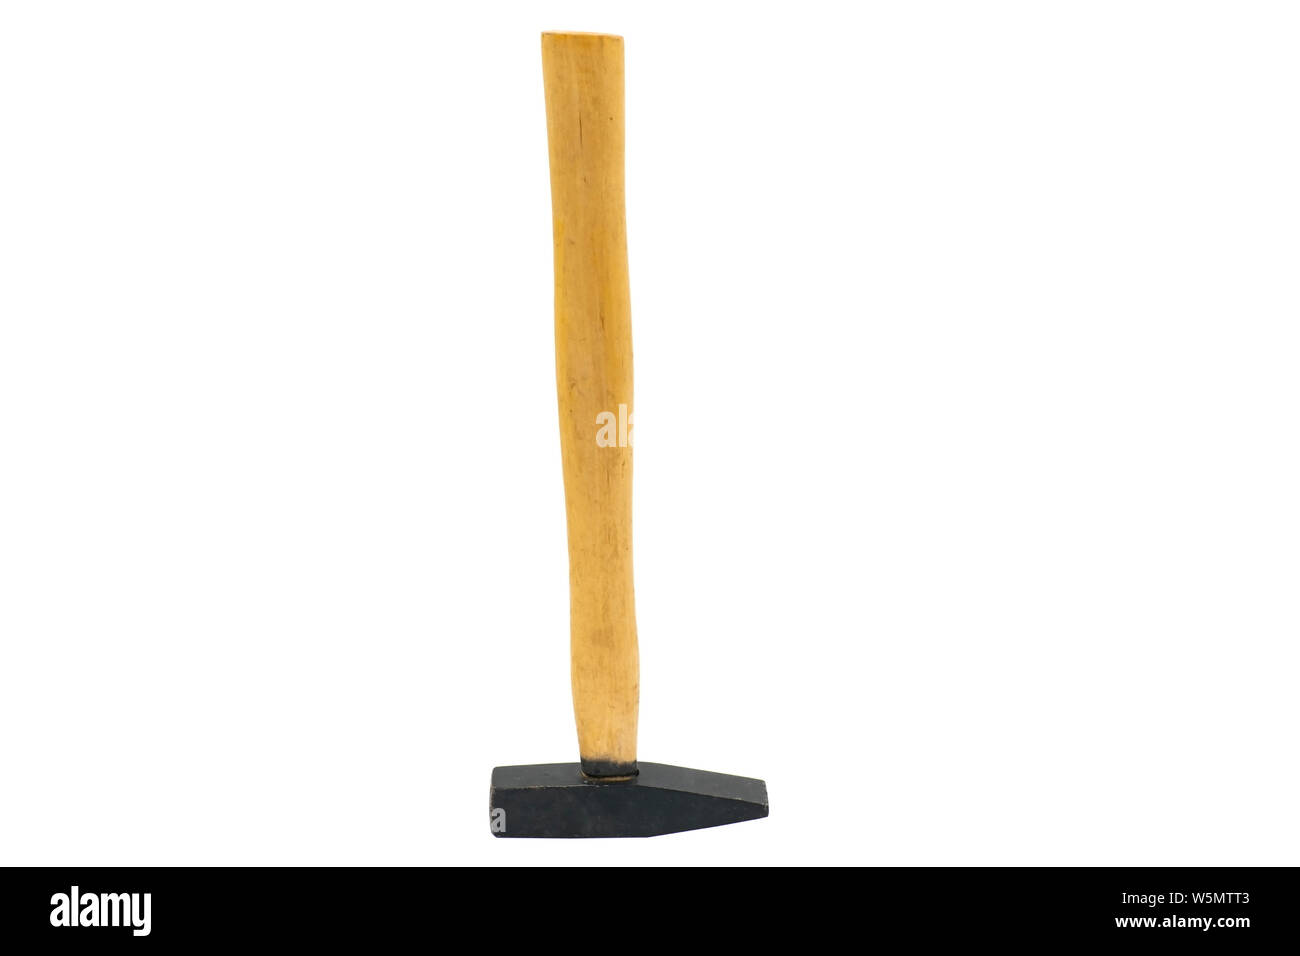 Bench and mounting tool. Hammer with wooden handle. Isolate on white background. Stock Photo